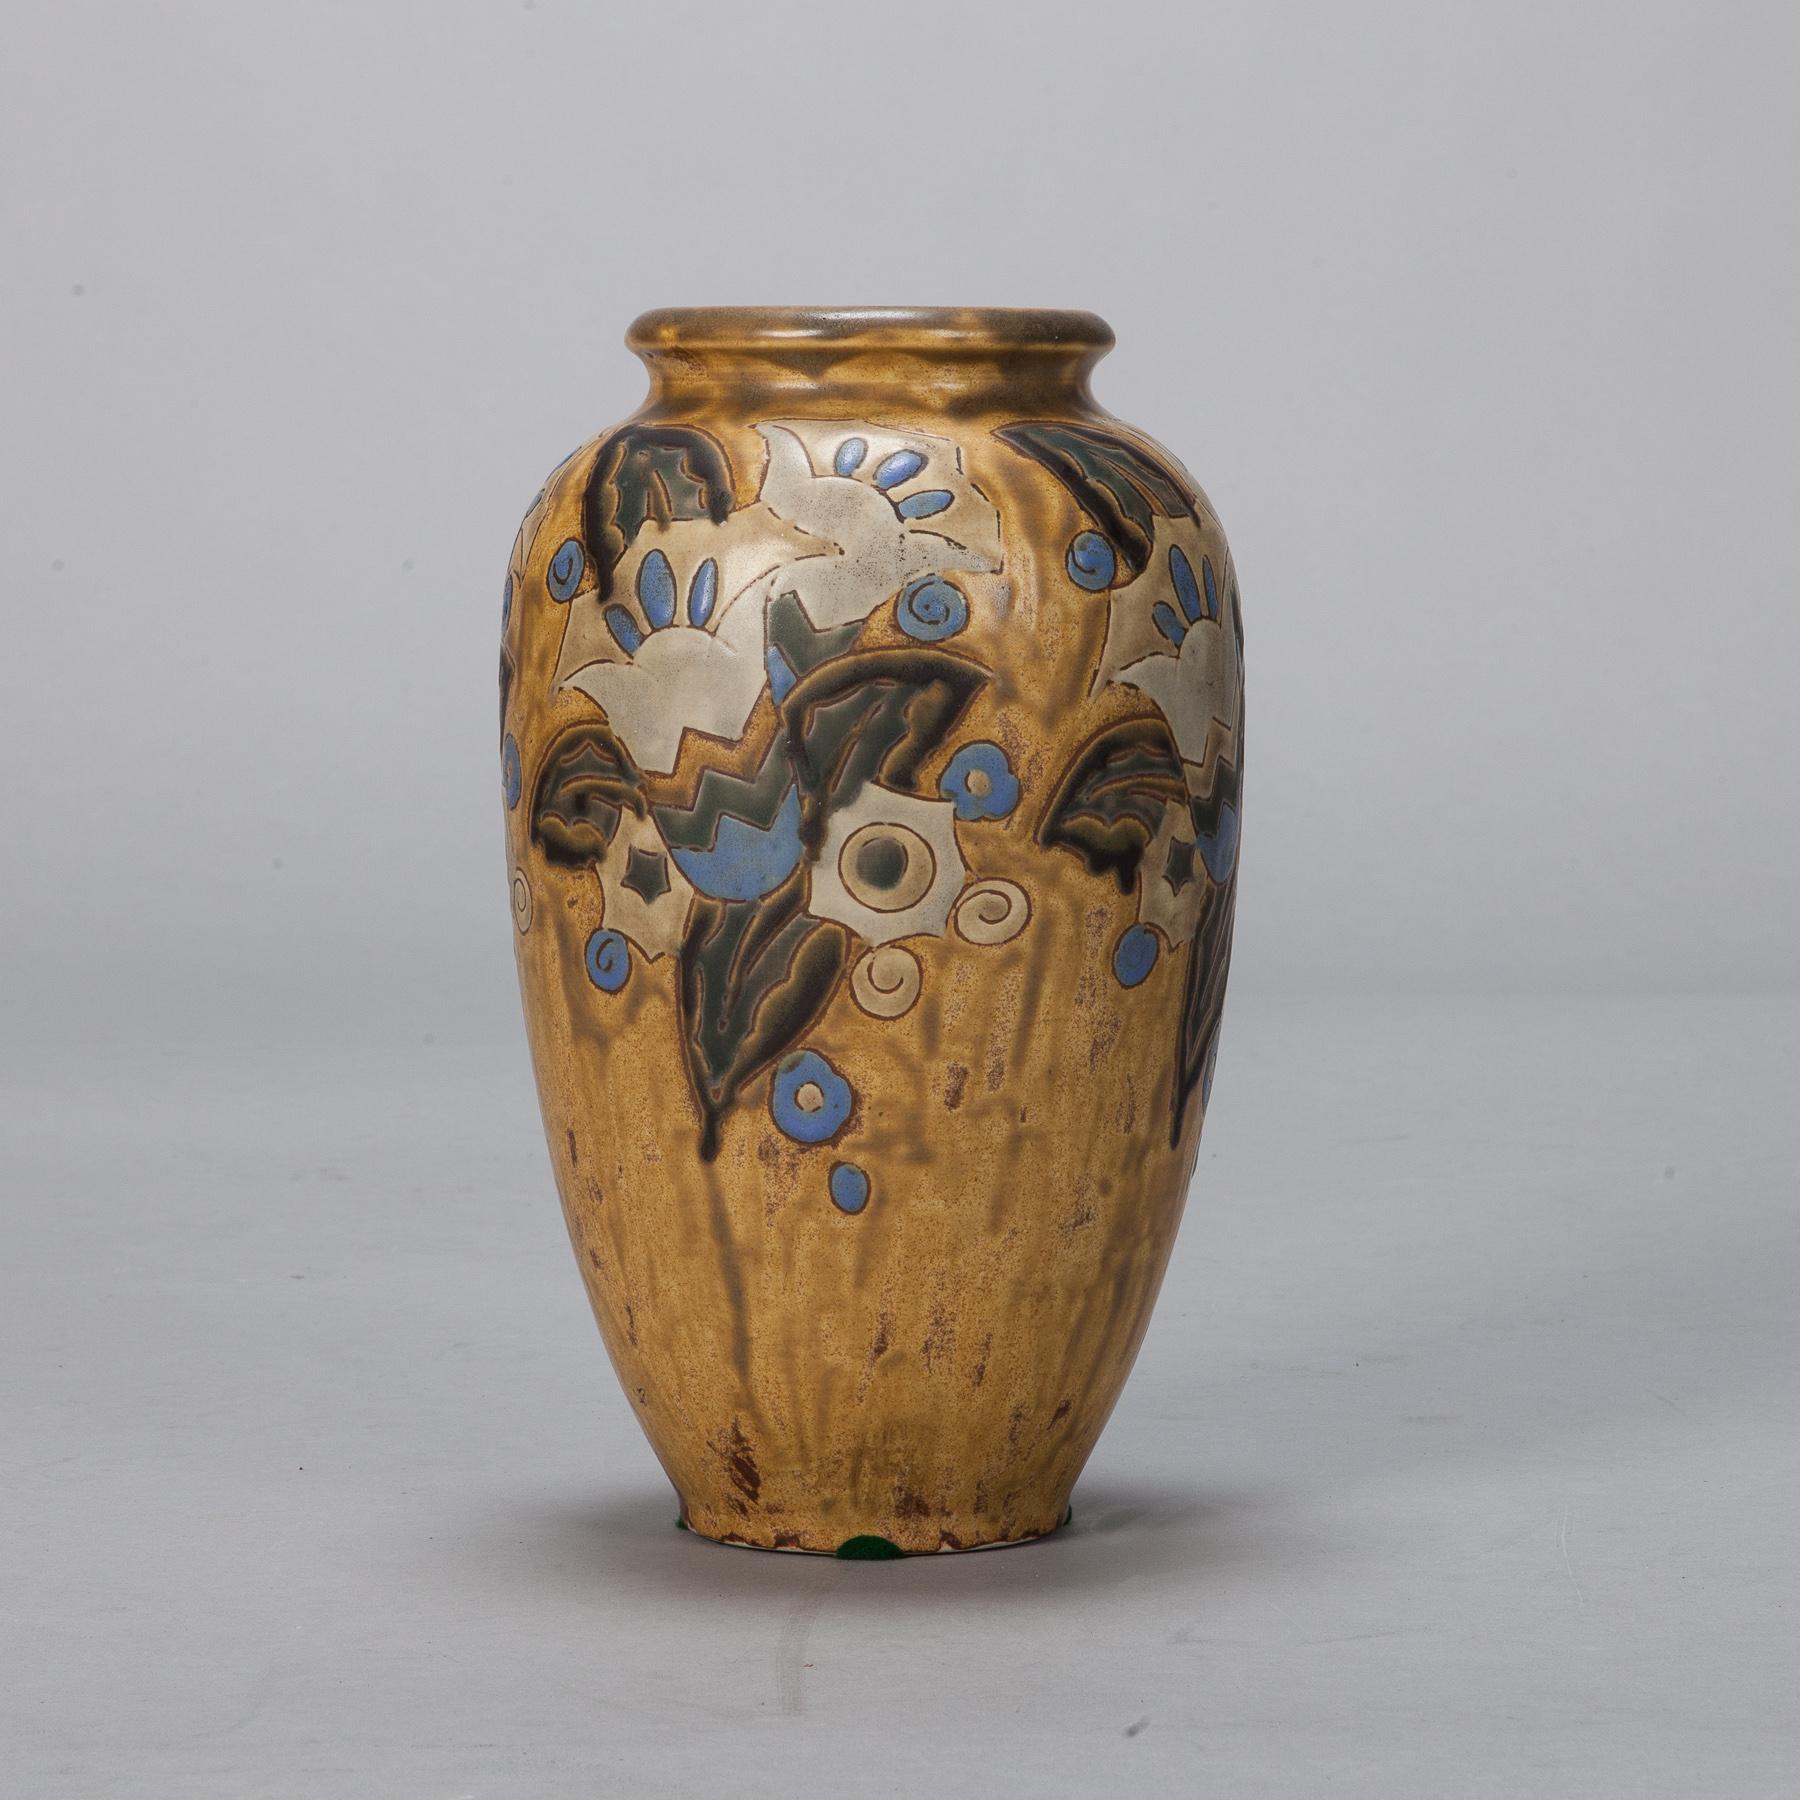 Art Deco era Boche ceramic vase with mustard/gold colored glazed with blue stylized floral design attributed to Charles Catteau. Marked on the bottom Gres Keramis - Boche Belgium 911.